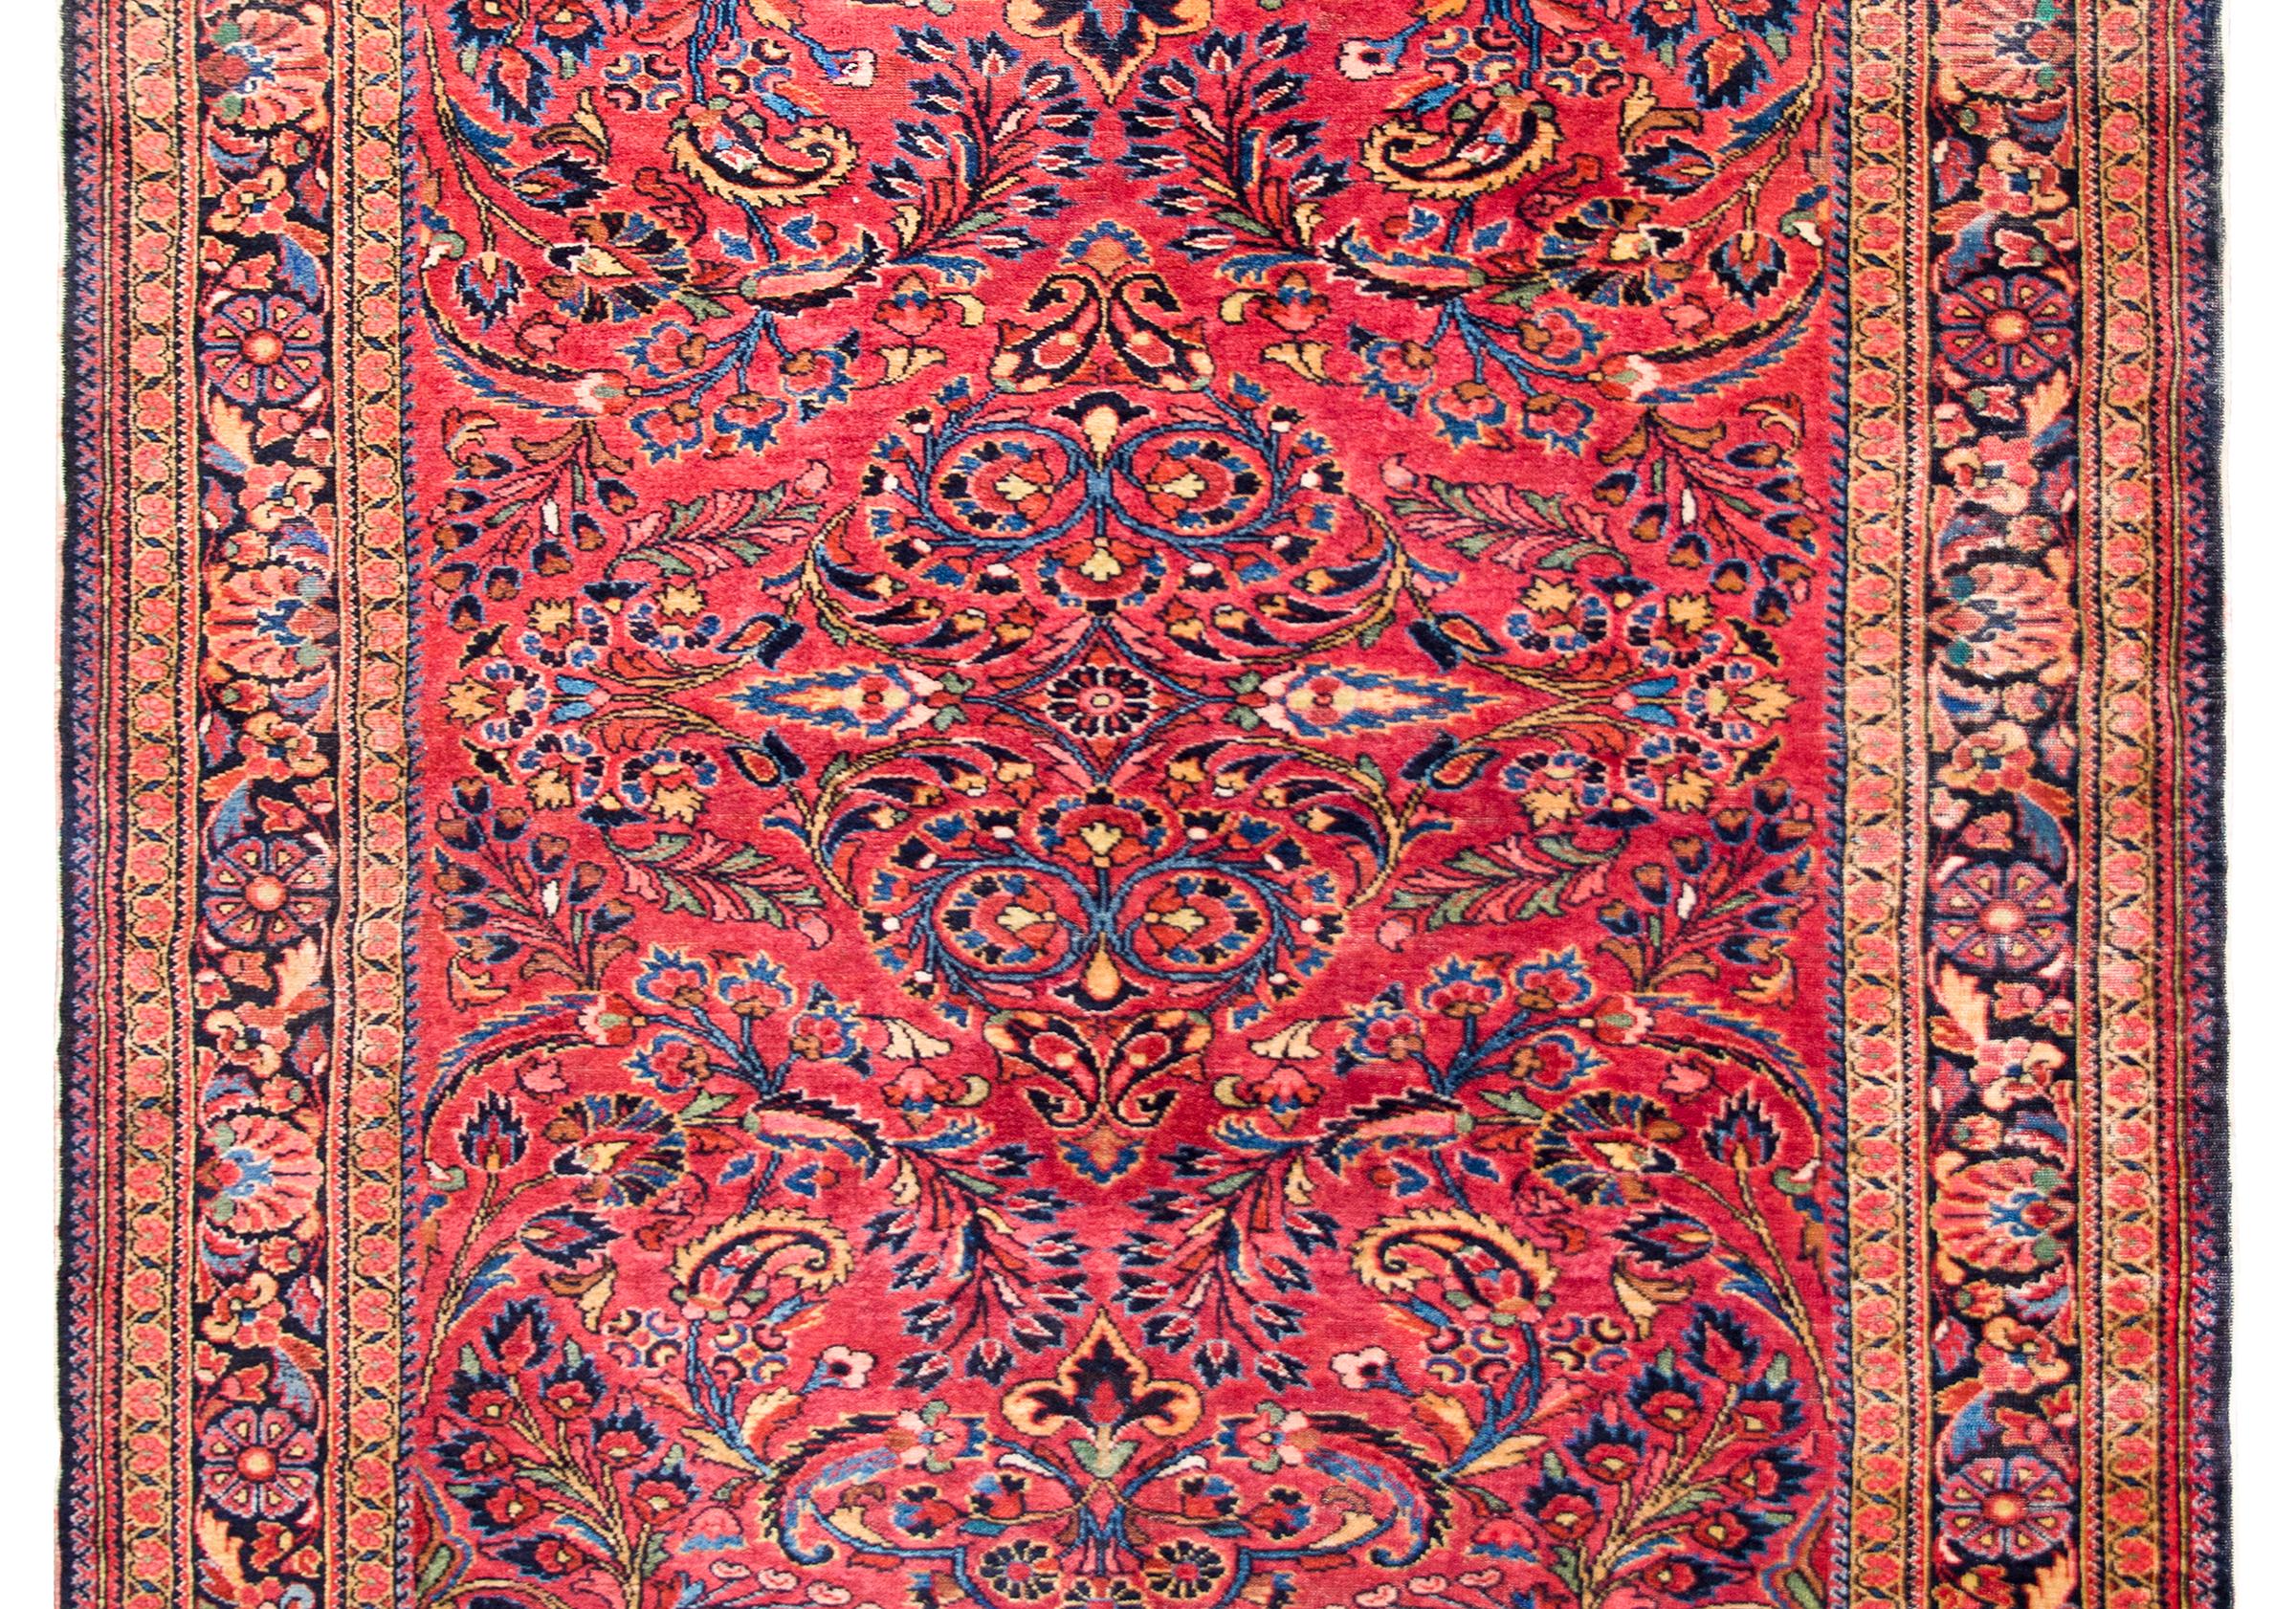 A beautiful early 20th century Persian Lilihan rug woven with a traditional mirrored floral pattern containing myriad flower and scrolling vines, surrounded by a wide repeated floral patterned border, and all woven in traditional Lilihan colors of